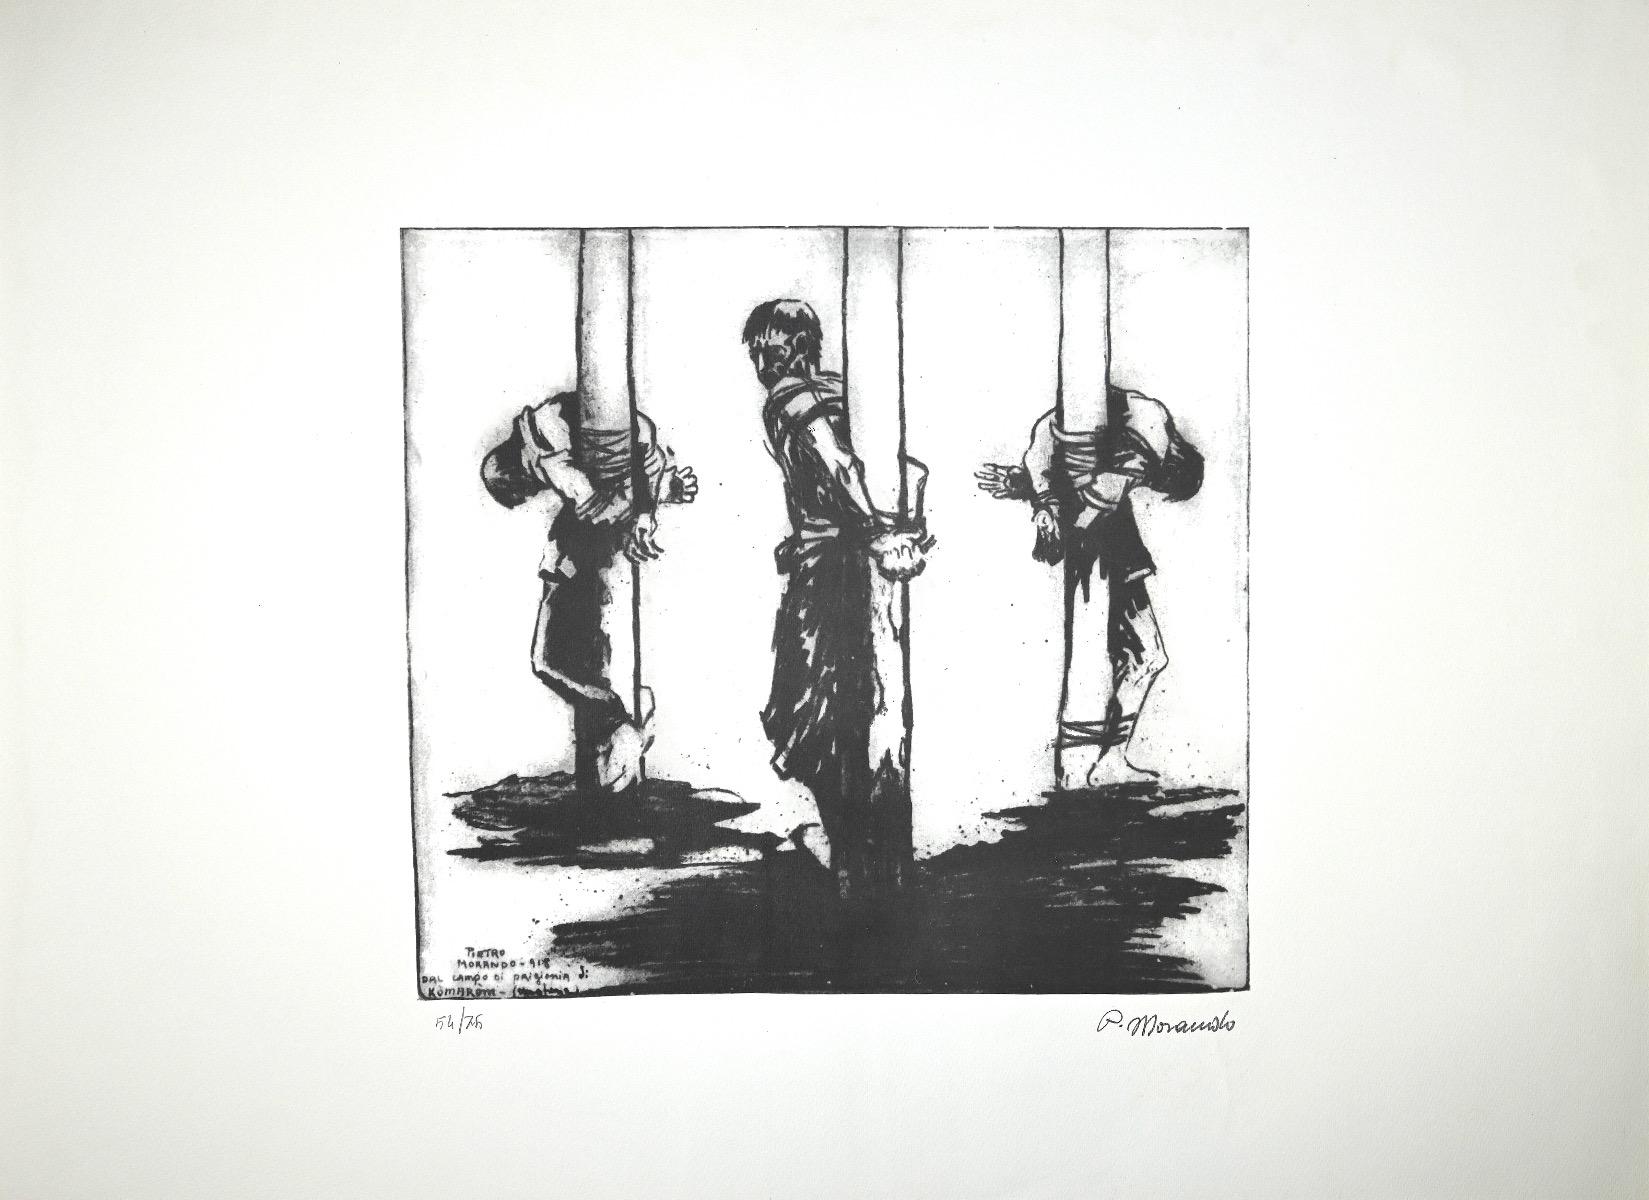 Prisoners in Hungary is an original lithograph realized by Italian artist Pietro Morando (Alessandria 1889- 1980).

Hand-signed on the lower right in pencil, signed and titled on the plate on the lower left.

Numbered on the lower left in pencil,